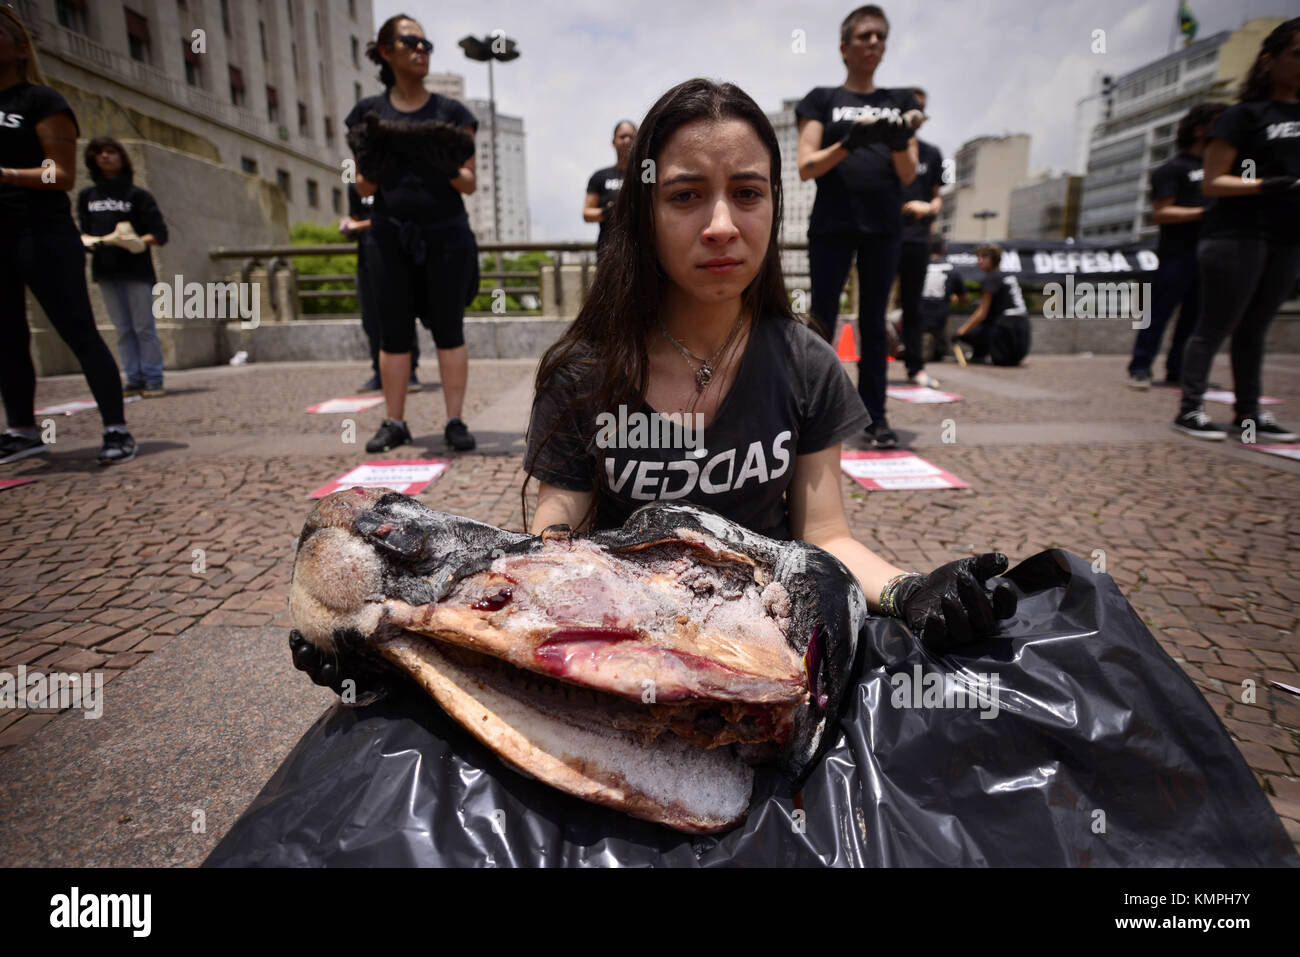 December 8, 2017 - SÃ¢O Paulo, SÃ£o Paulo, Brazil - SAO PAULO SP, SP 08/12/2017 PROTESTO SP: Ong VEDDAS (Ethical Vegetarianism, Defense of Animal Rights and Society) carries out an act of education for veganism. Activists have held bodies of fish, pigs and birds, among others. This happens on the eve of International Animal Rights Day. Pieces of pig, rat, fish and bird bodies were exhibited this Friday (8) at Viaduto do ChÃ¡ in SÃ£o Paulo in a demonstration held by animal rights defenders to report the mistreatment recorded on farms, slaughterhouses and laboratories. (Credit Image: © Cris Faga Stock Photo